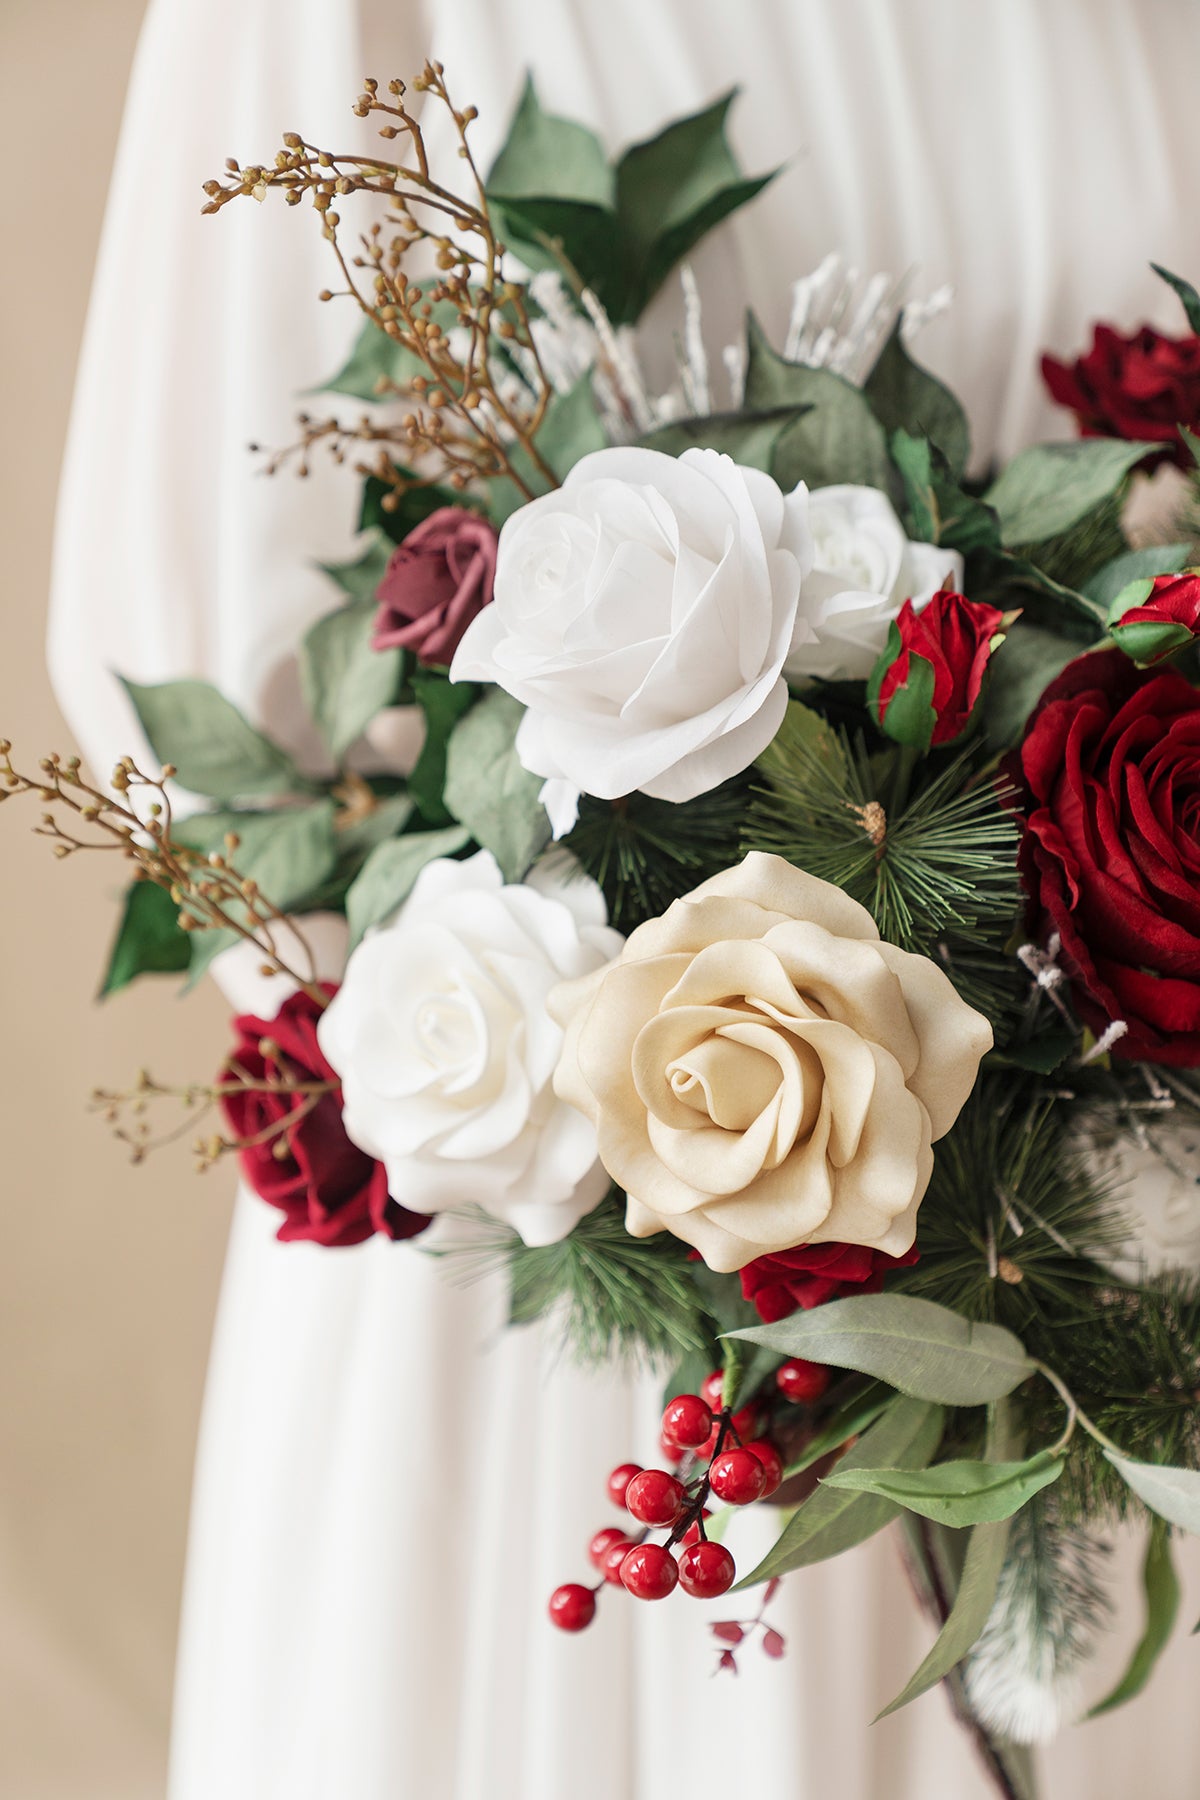 Medium Free-Form Bridal Bouquet in Christmas Red & Sparkle | Clearance